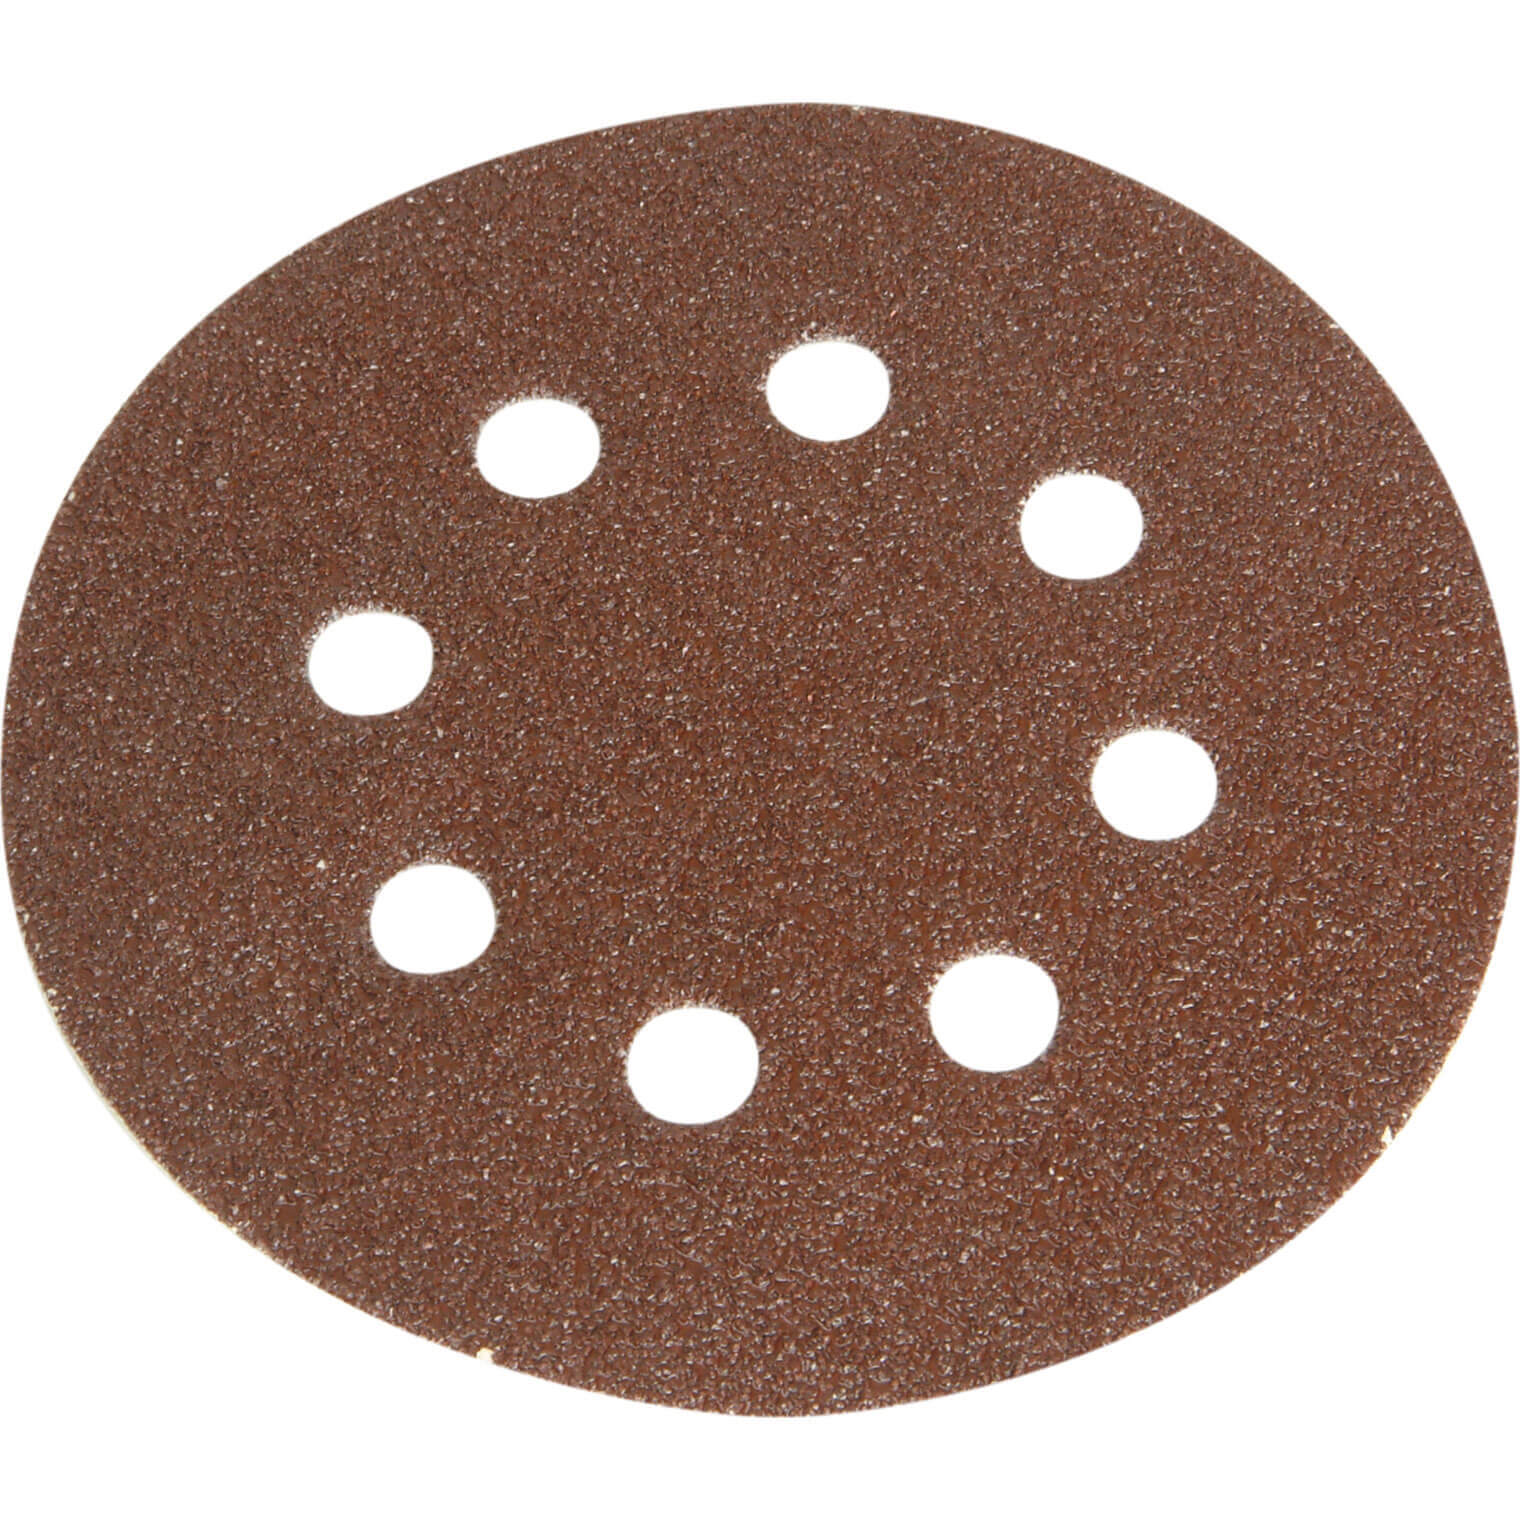 Image of Faithfull 125mm Hook and Loop Perforated Sanding Discs 125mm Medium Fine Pack of 5